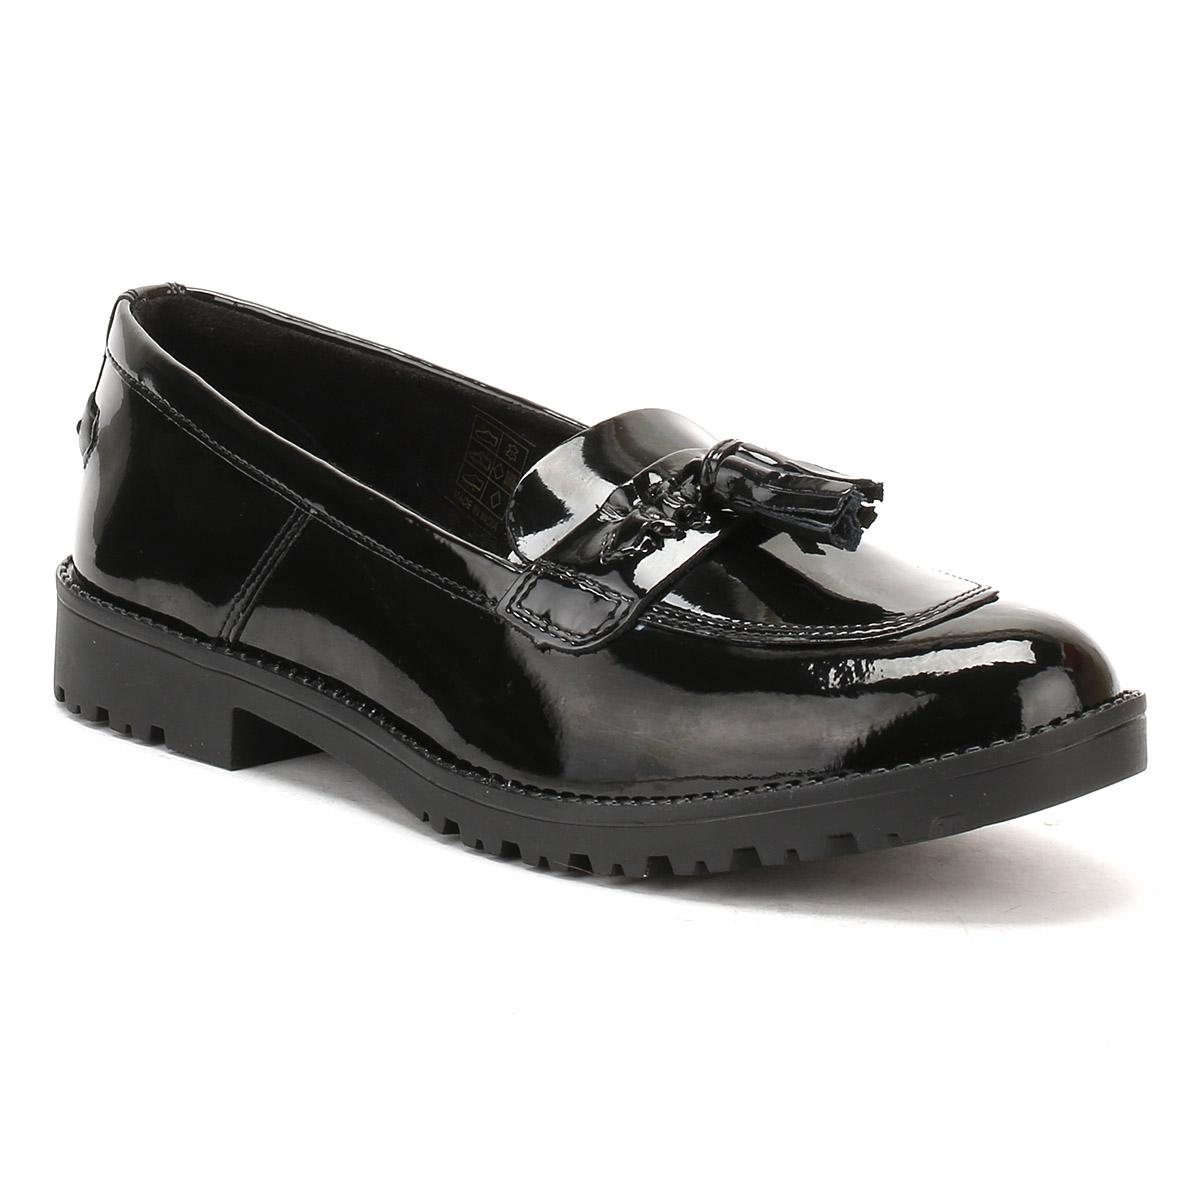 Kickers Womens Black Patent Leather Lachly Tass Loafers - Lyst